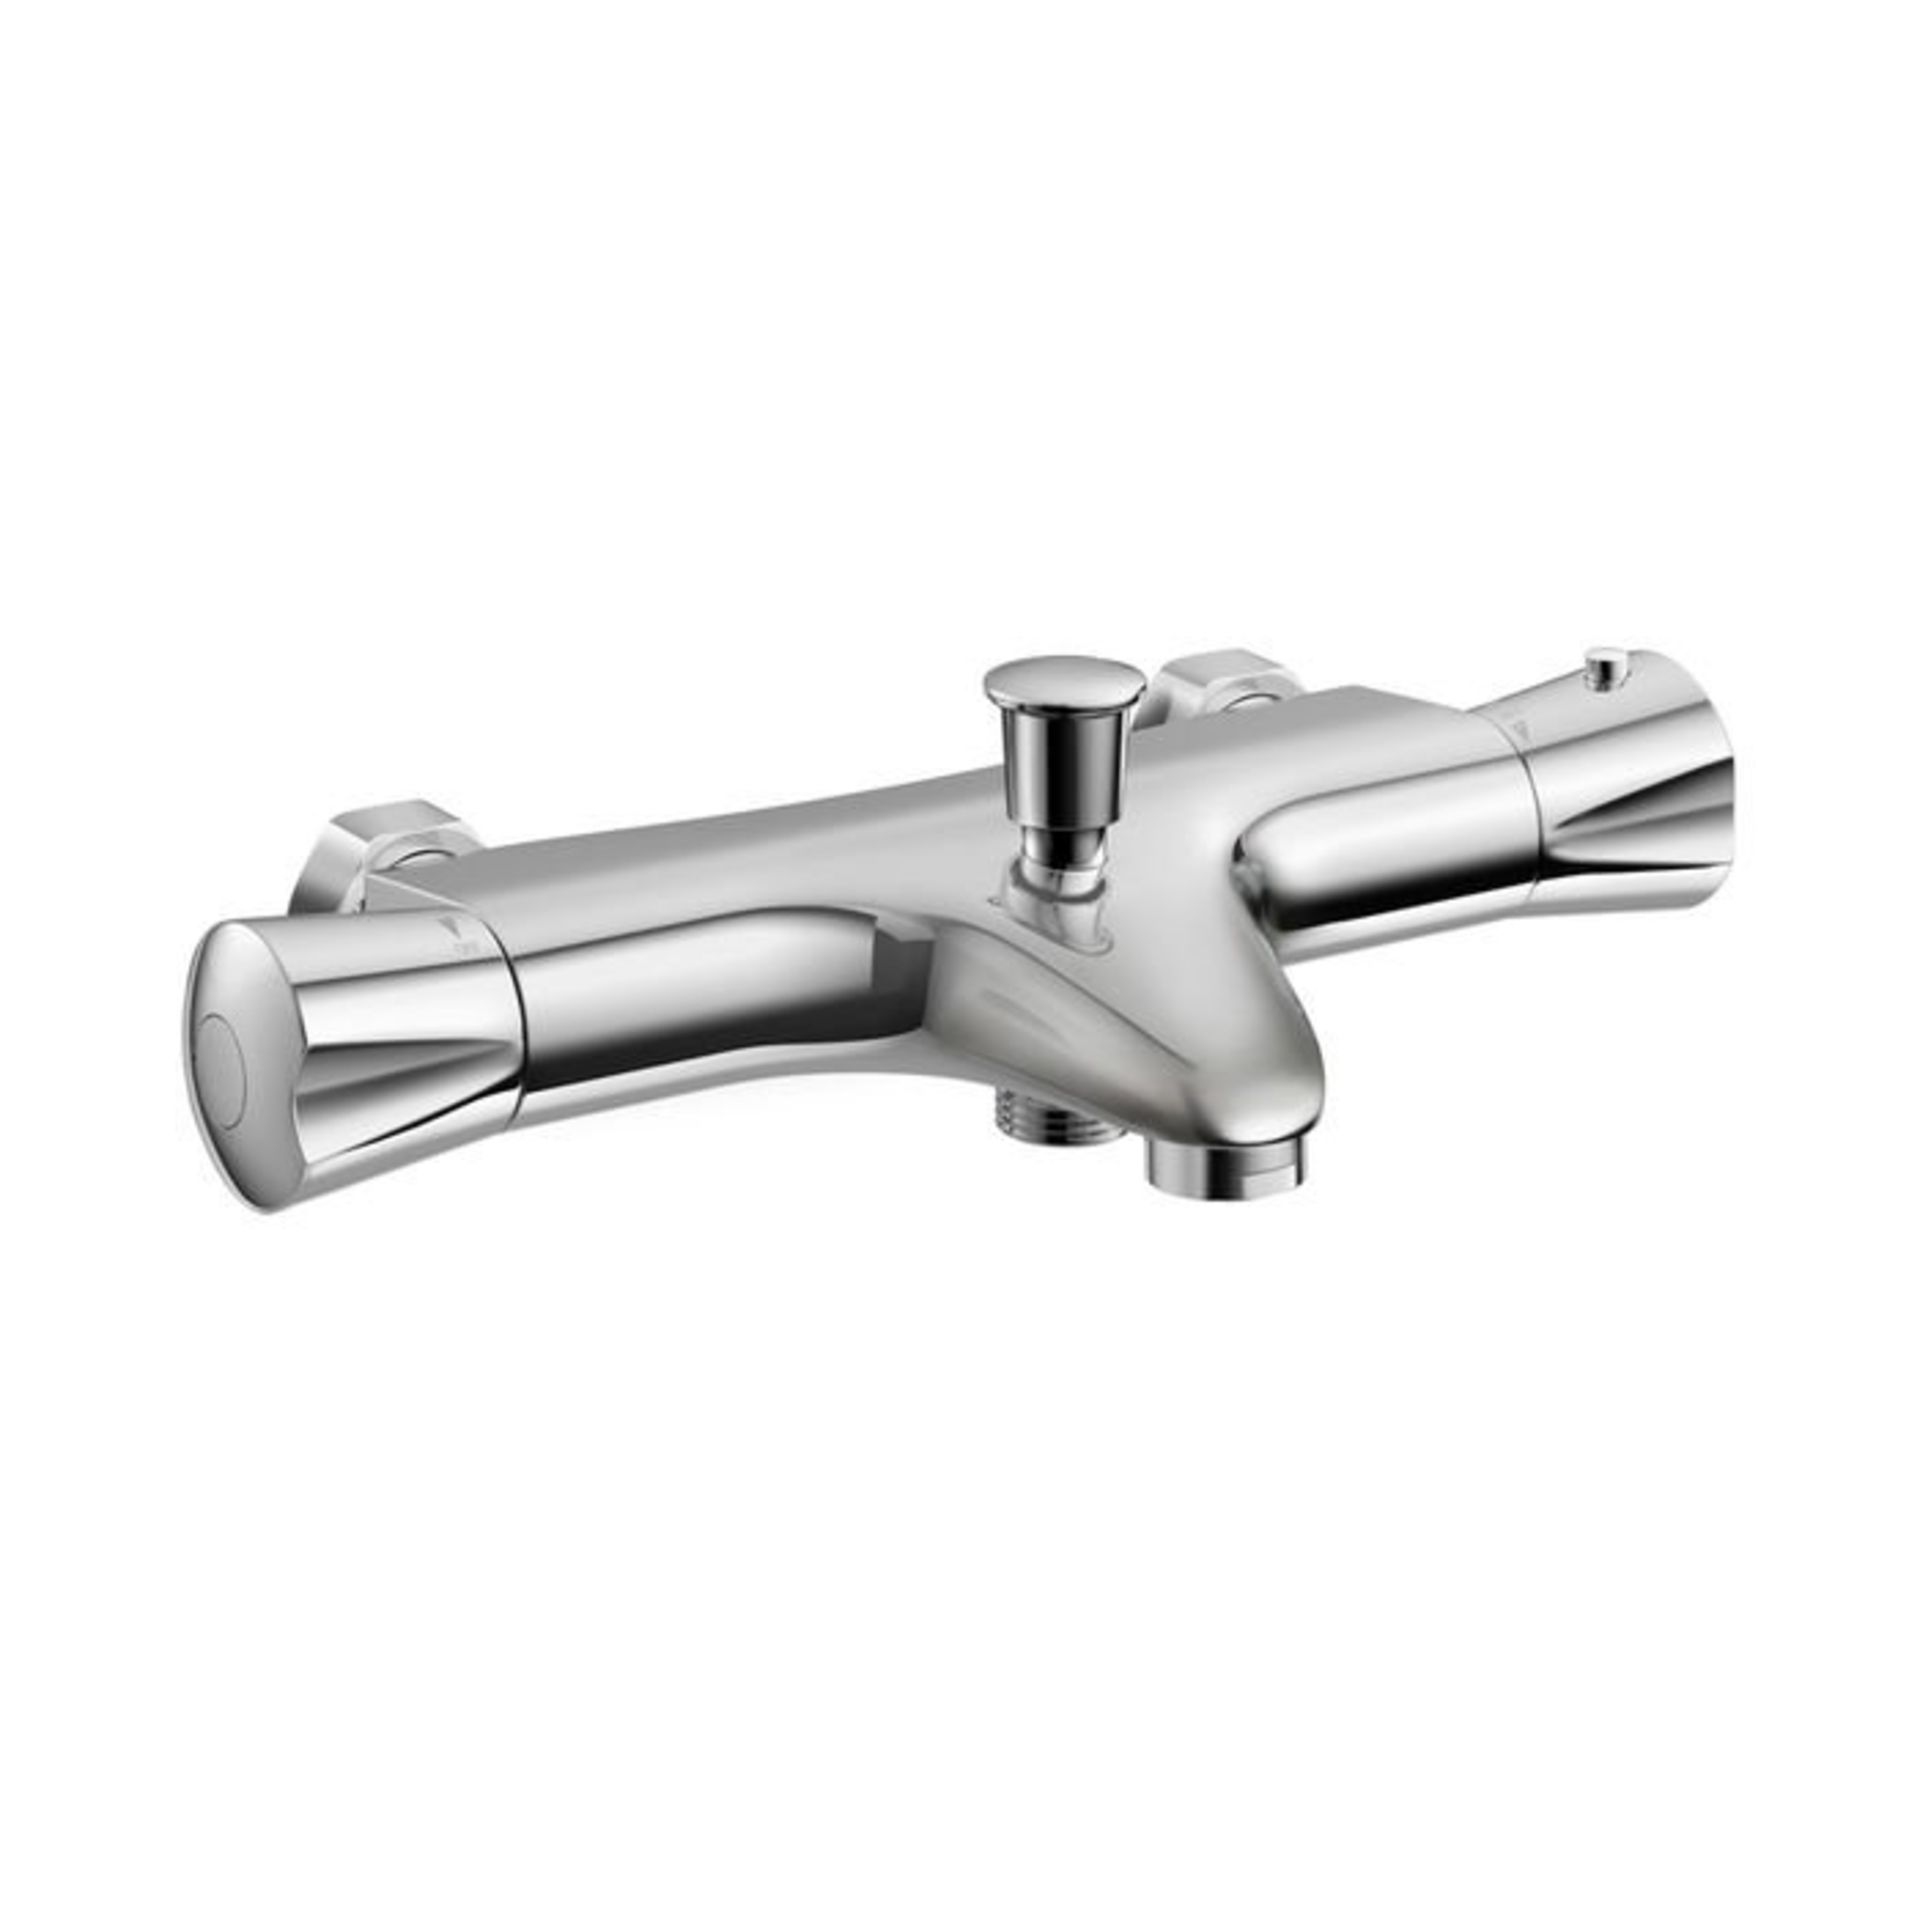 (S184) Shower Mixer Valve with Bath Filler. RRP £199.99. Chrome Plated Solid Brass Mixer - Image 2 of 3